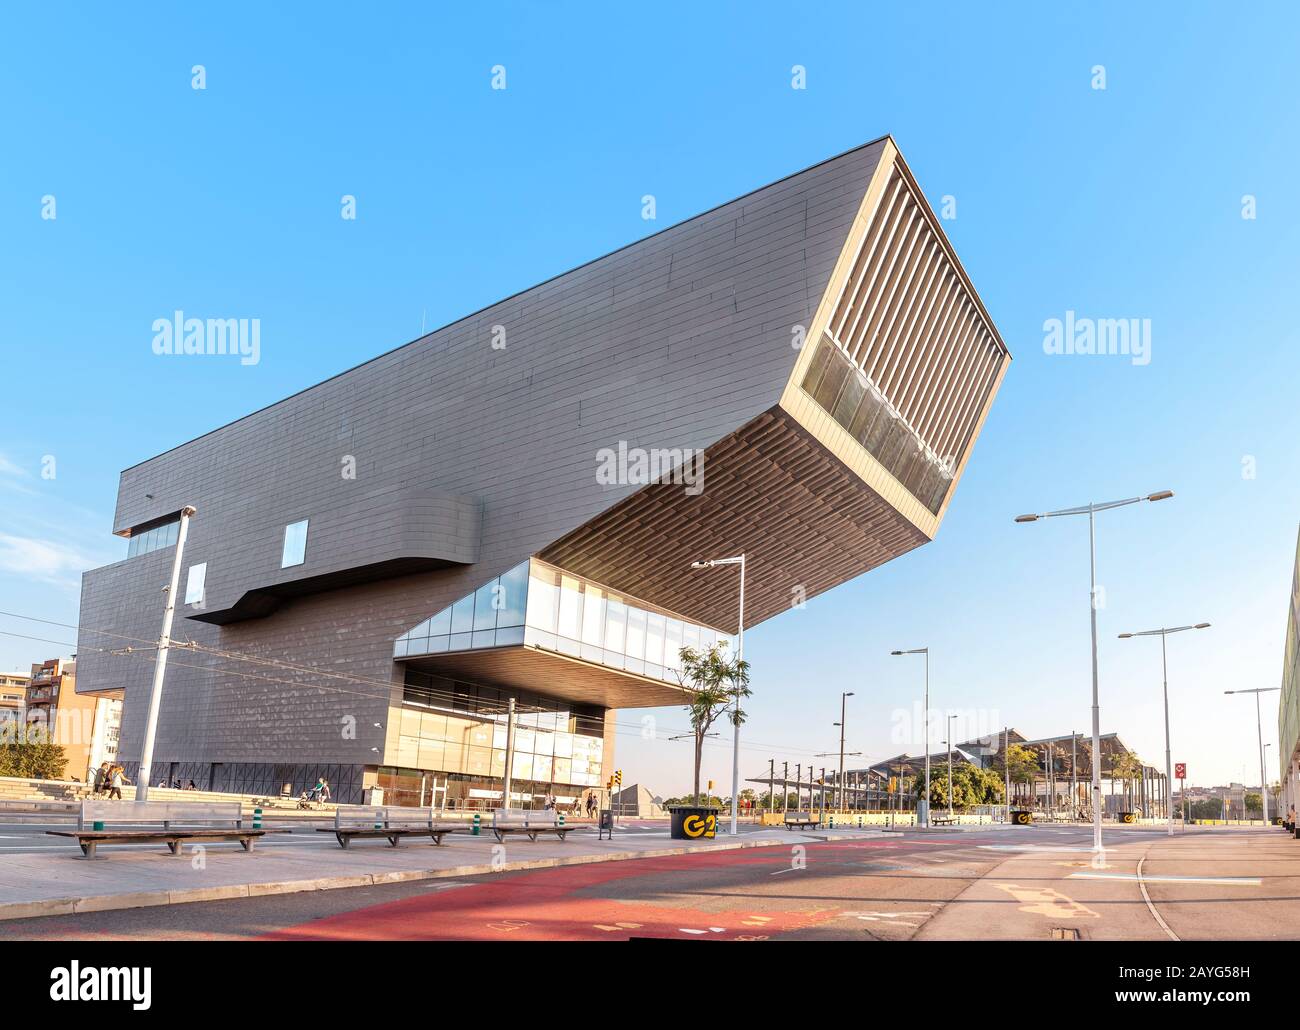 29 JULY 2018, BARCELONA, SPAIN: The Disseny museum and Torre Agbar, futuristic architecture in Barcelona Stock Photo